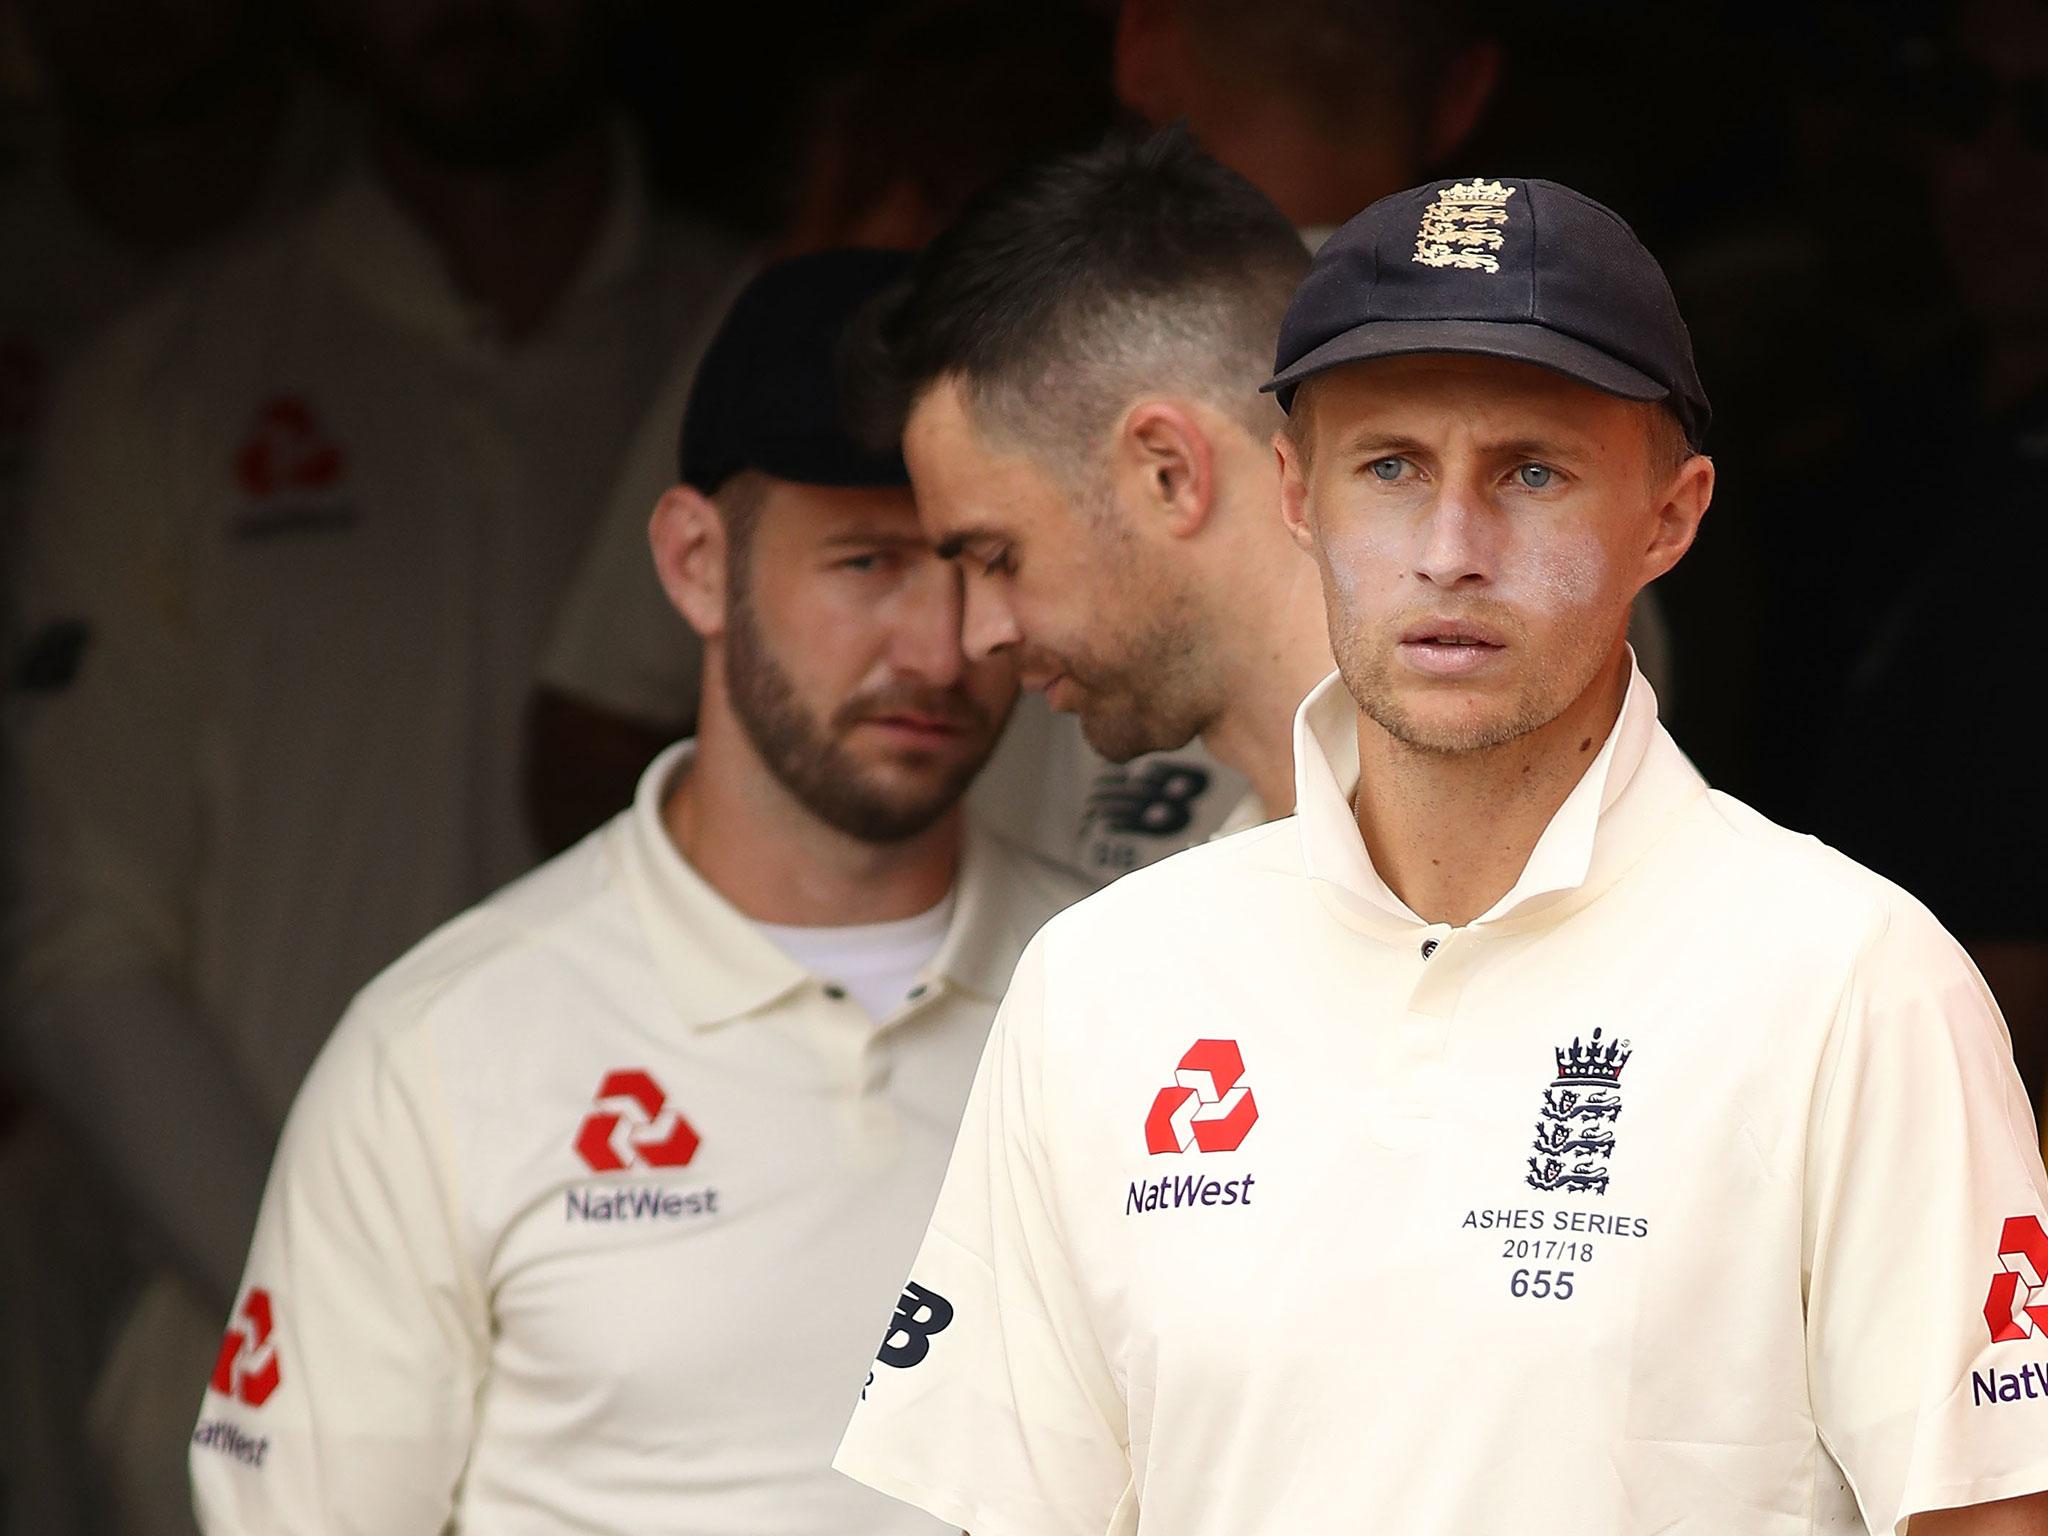 Smith may have won this battle but Root and his men have not given up hope of winning the war